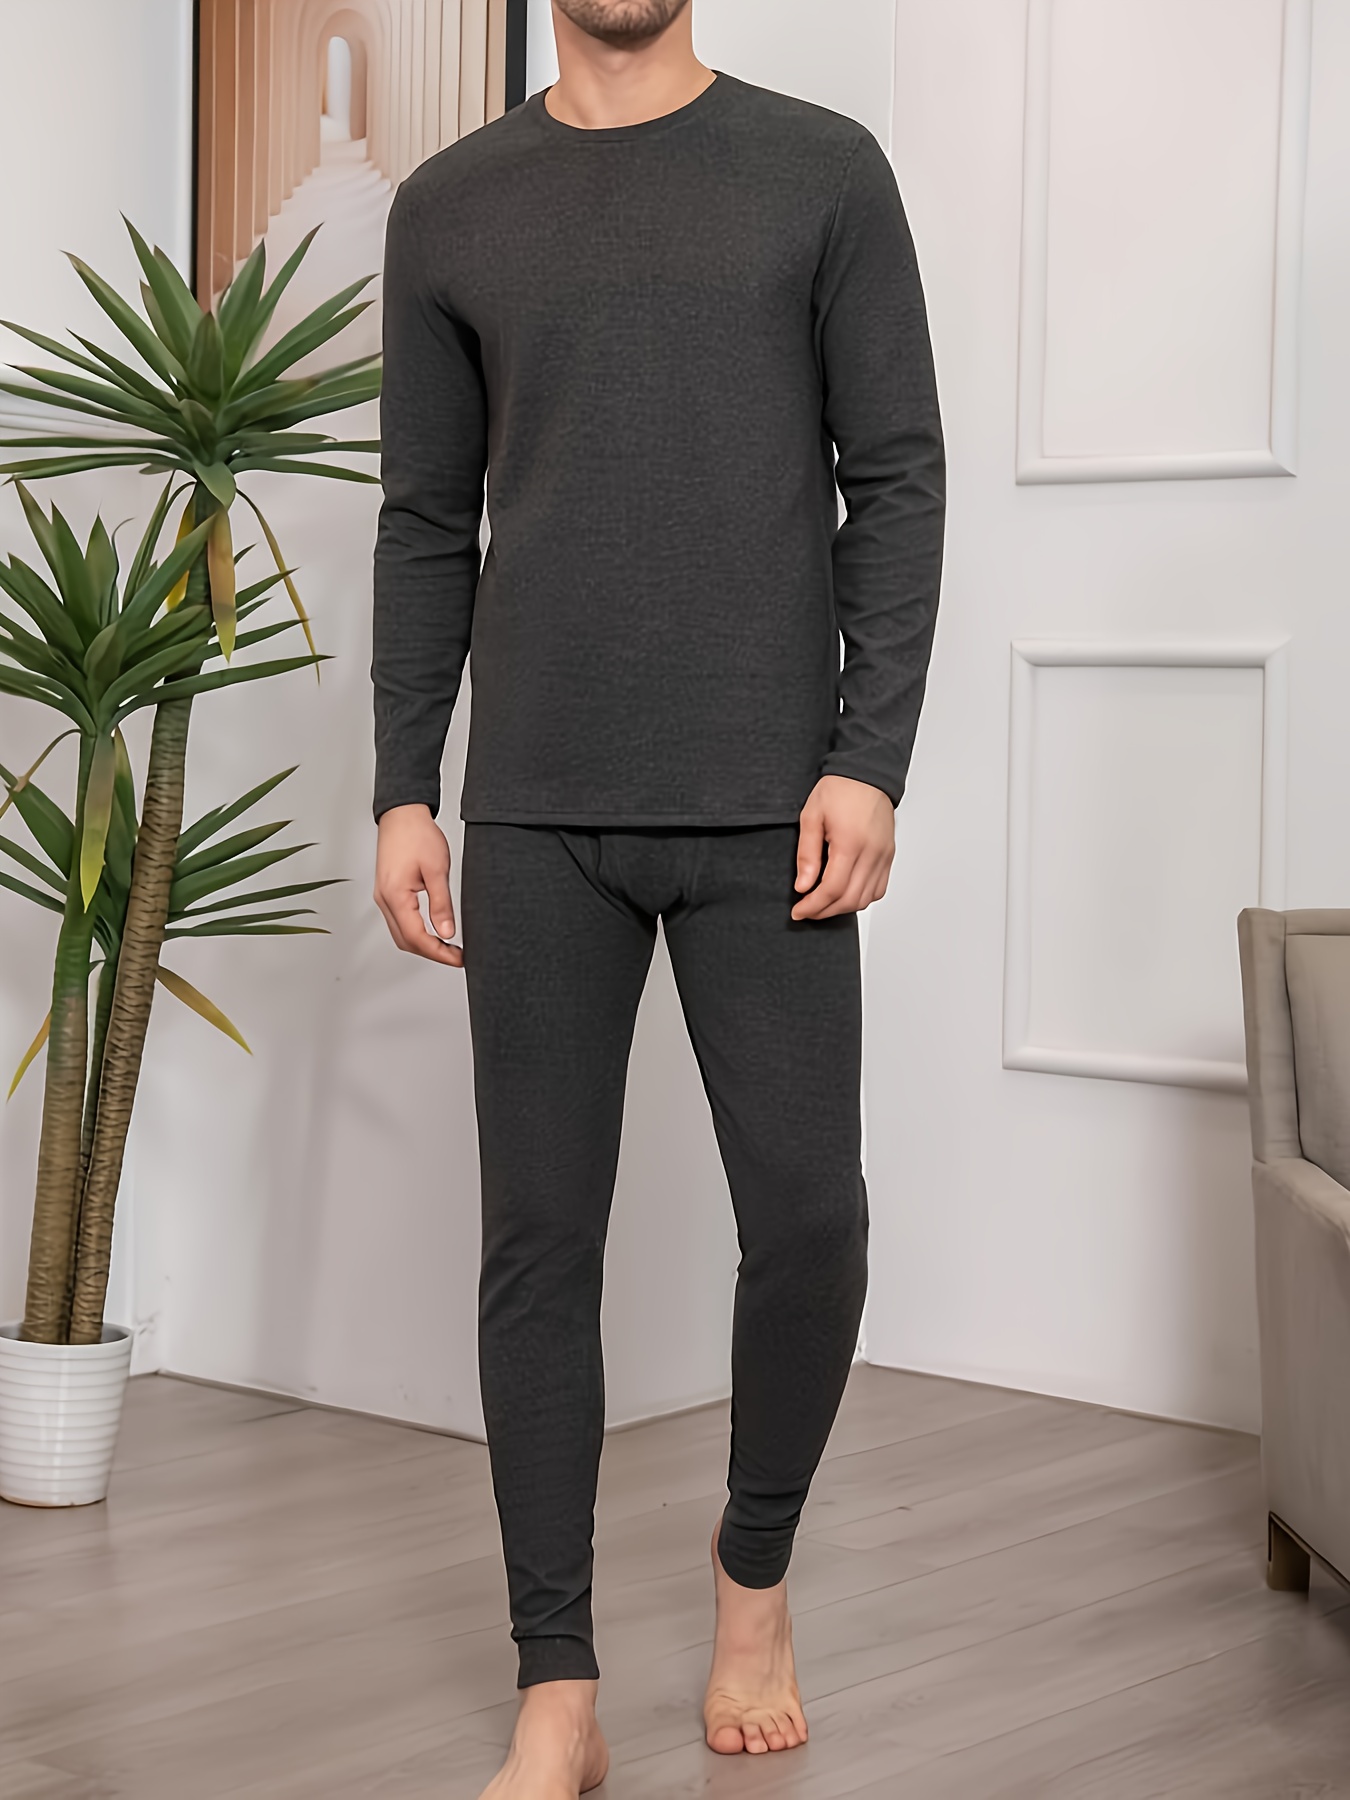 Buy Grey & Cream Pointelle Long Sleeve Thermal Top 2 Pack - 8, Thermals